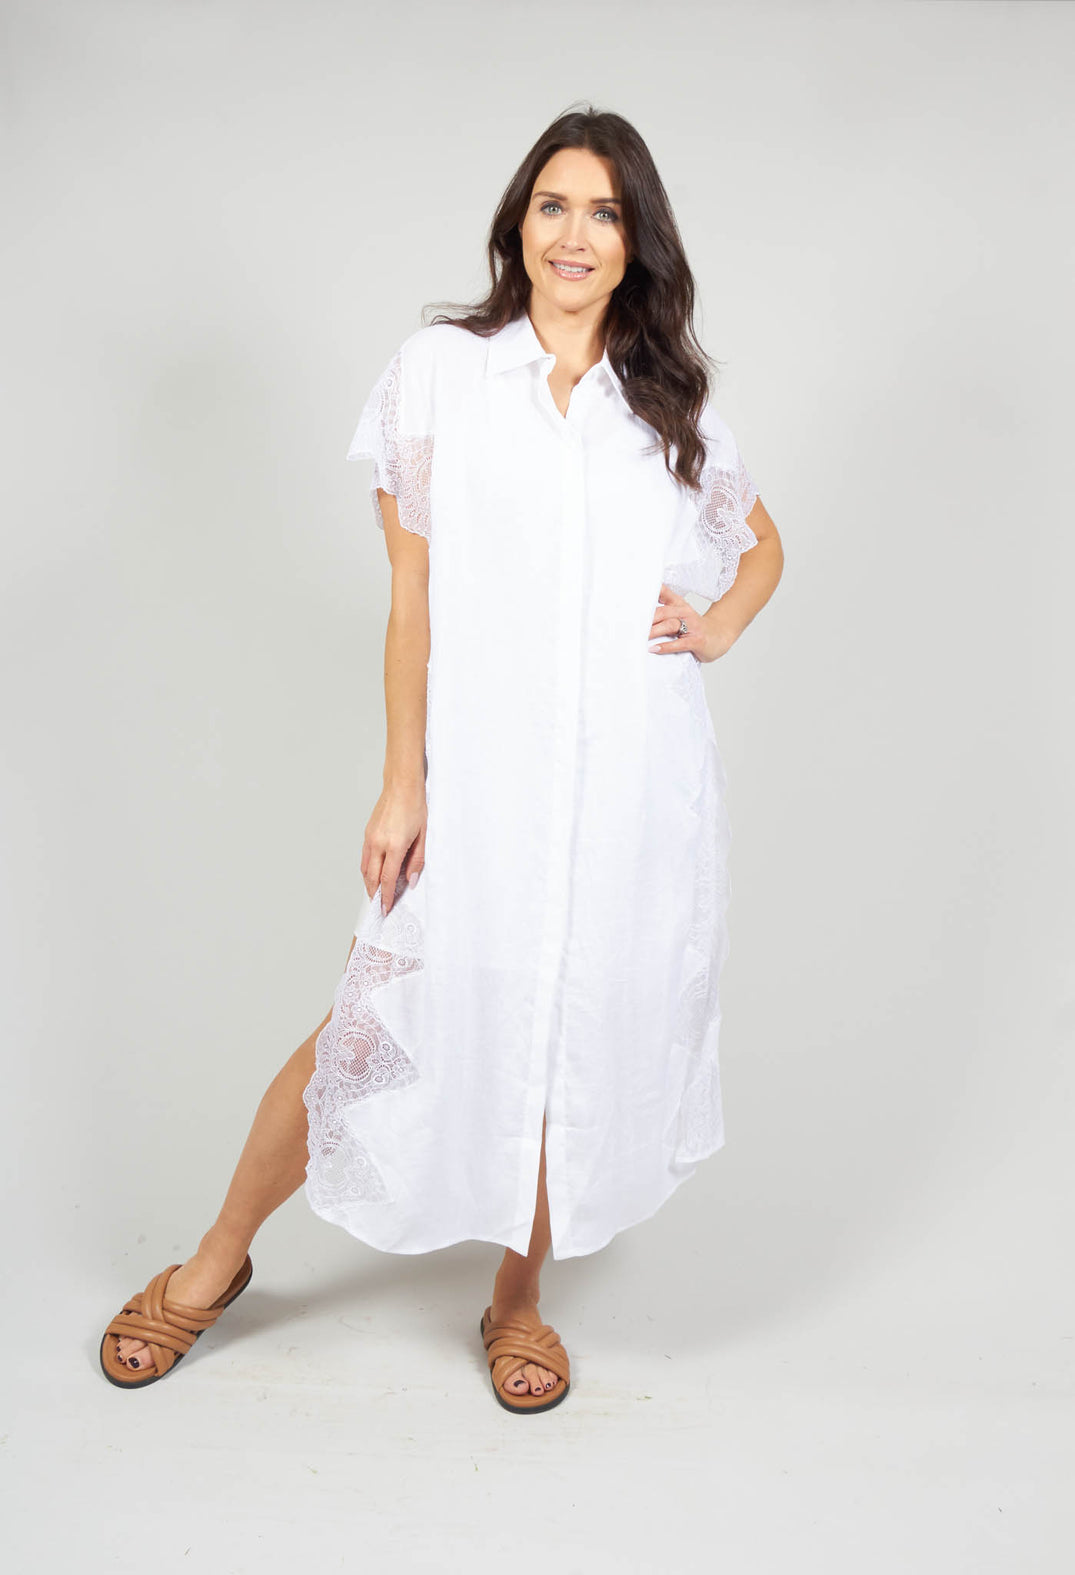 lady wearing white short sleeve shirt dress with lace detail